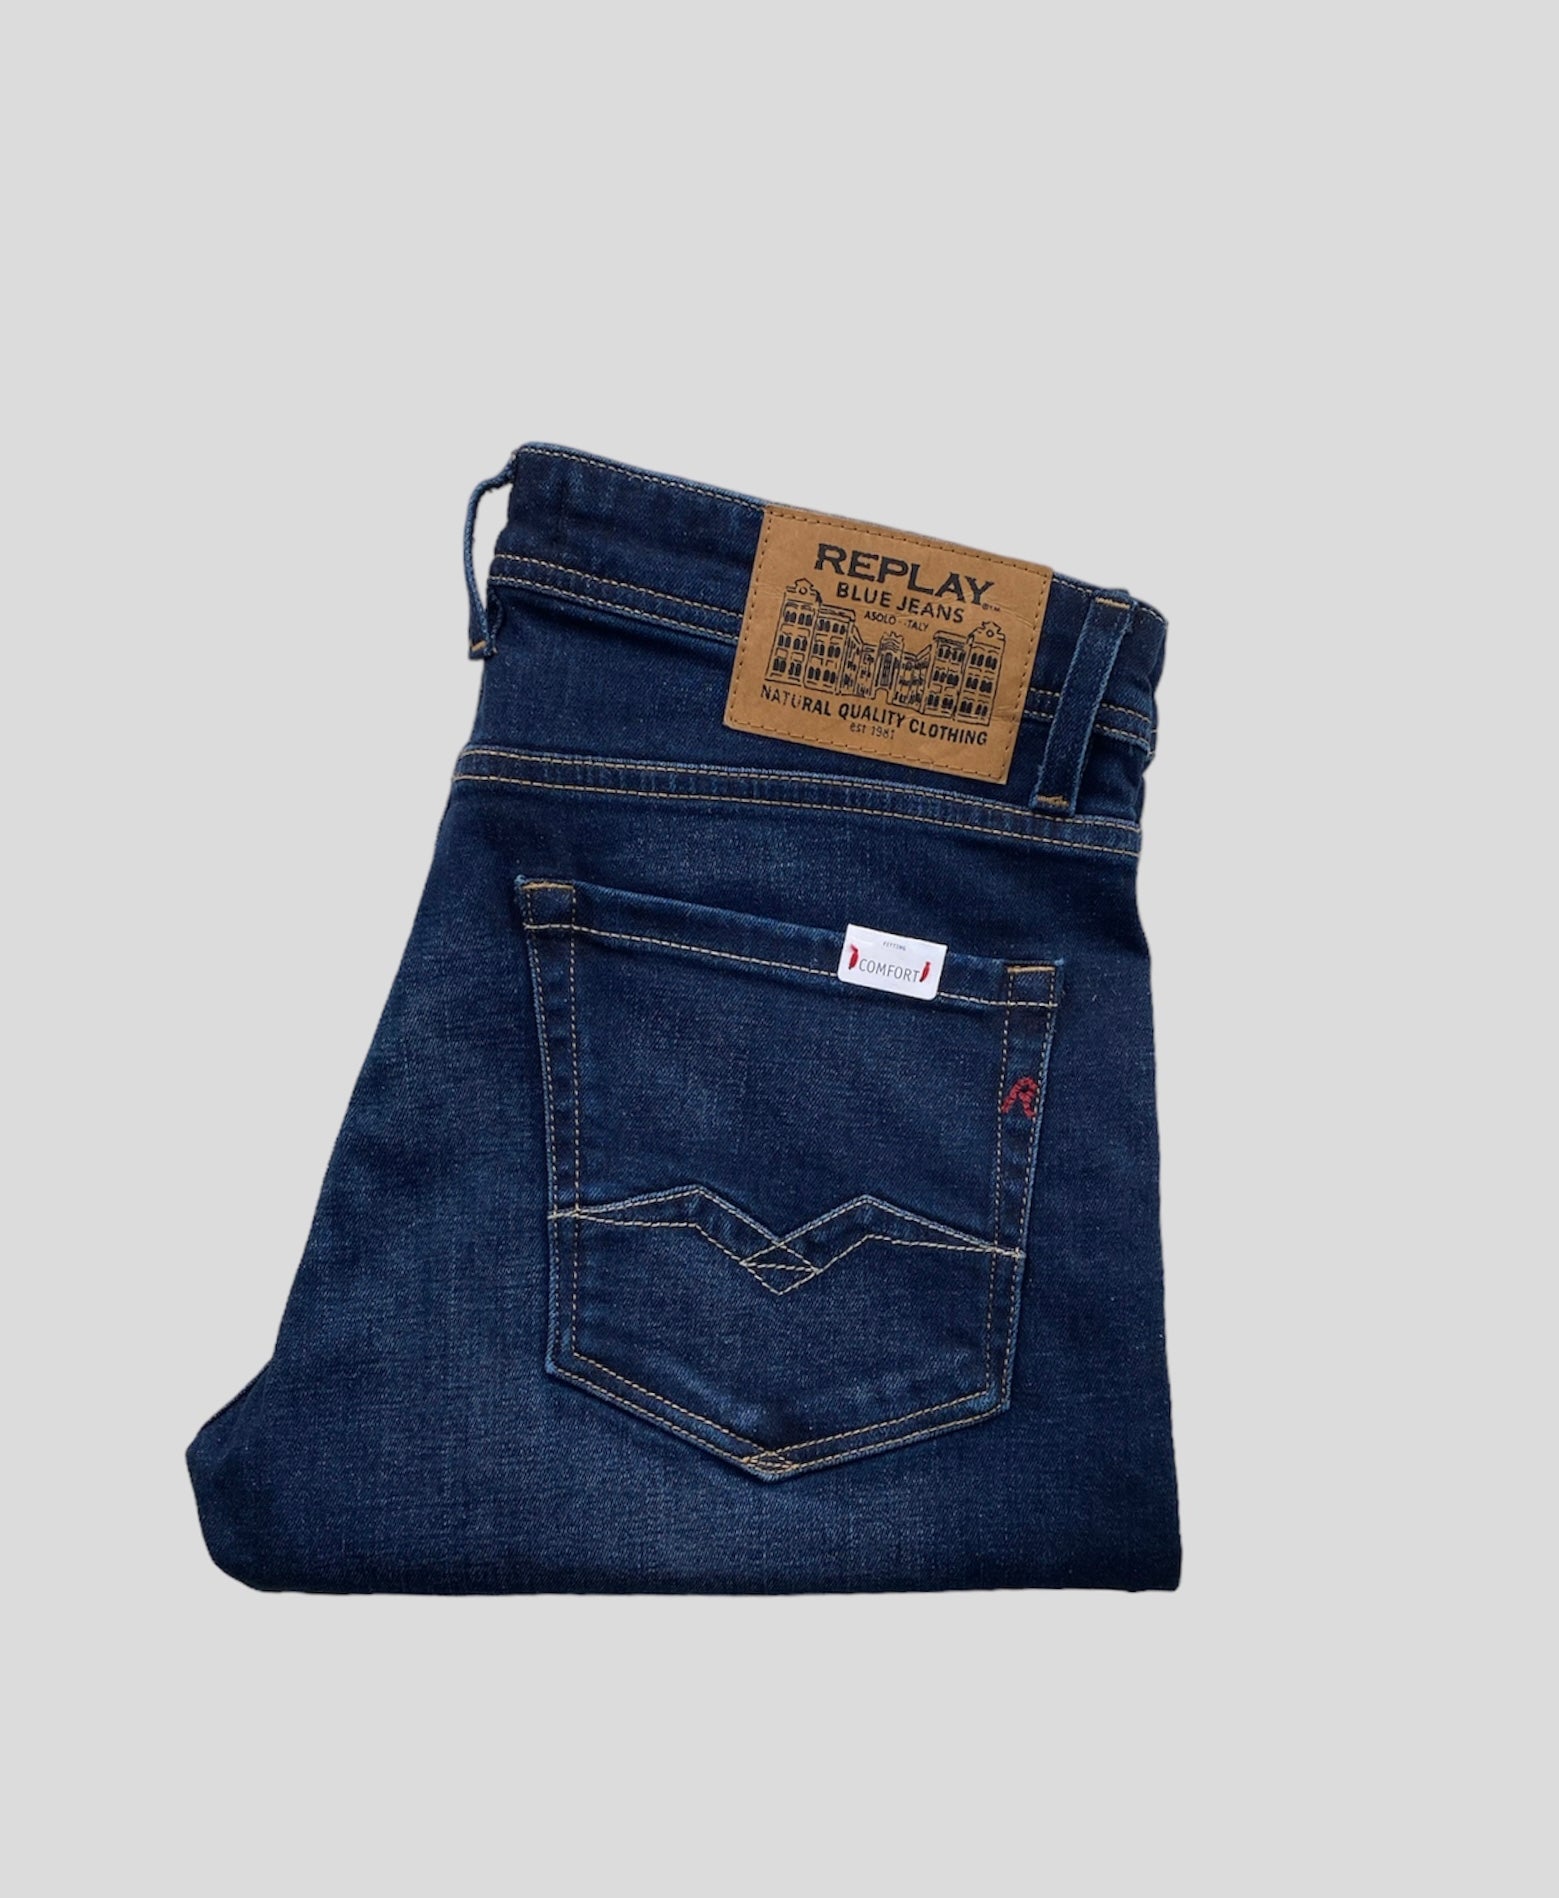 Replay "Rocco Comfort Fit" Jeans Dark Blue